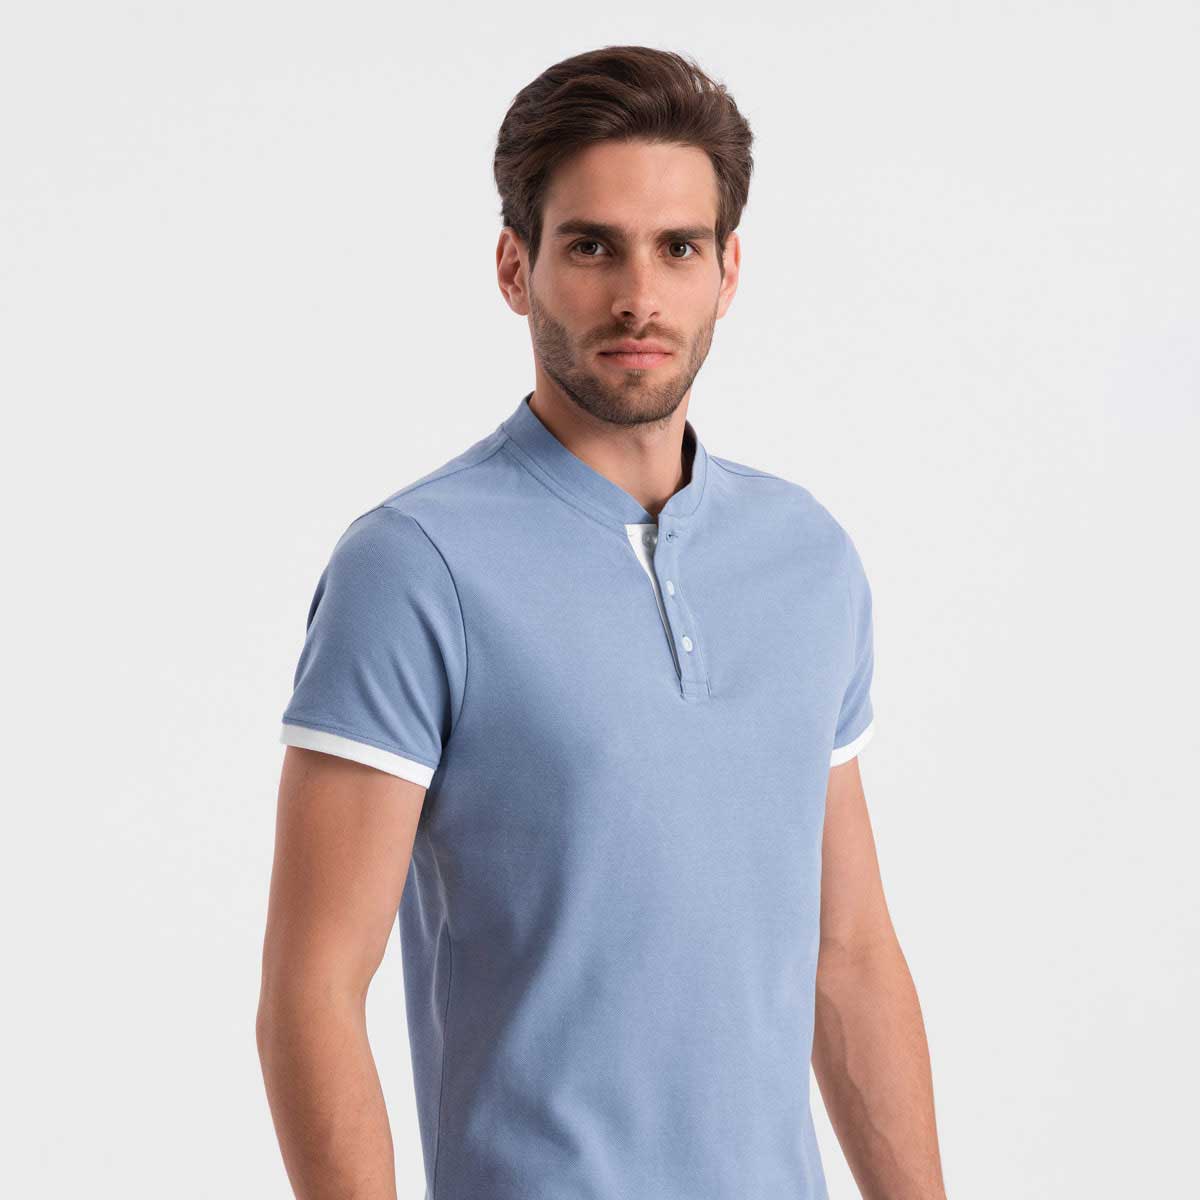 Wholesale Polo Shirts Manufacturers in Shakhty